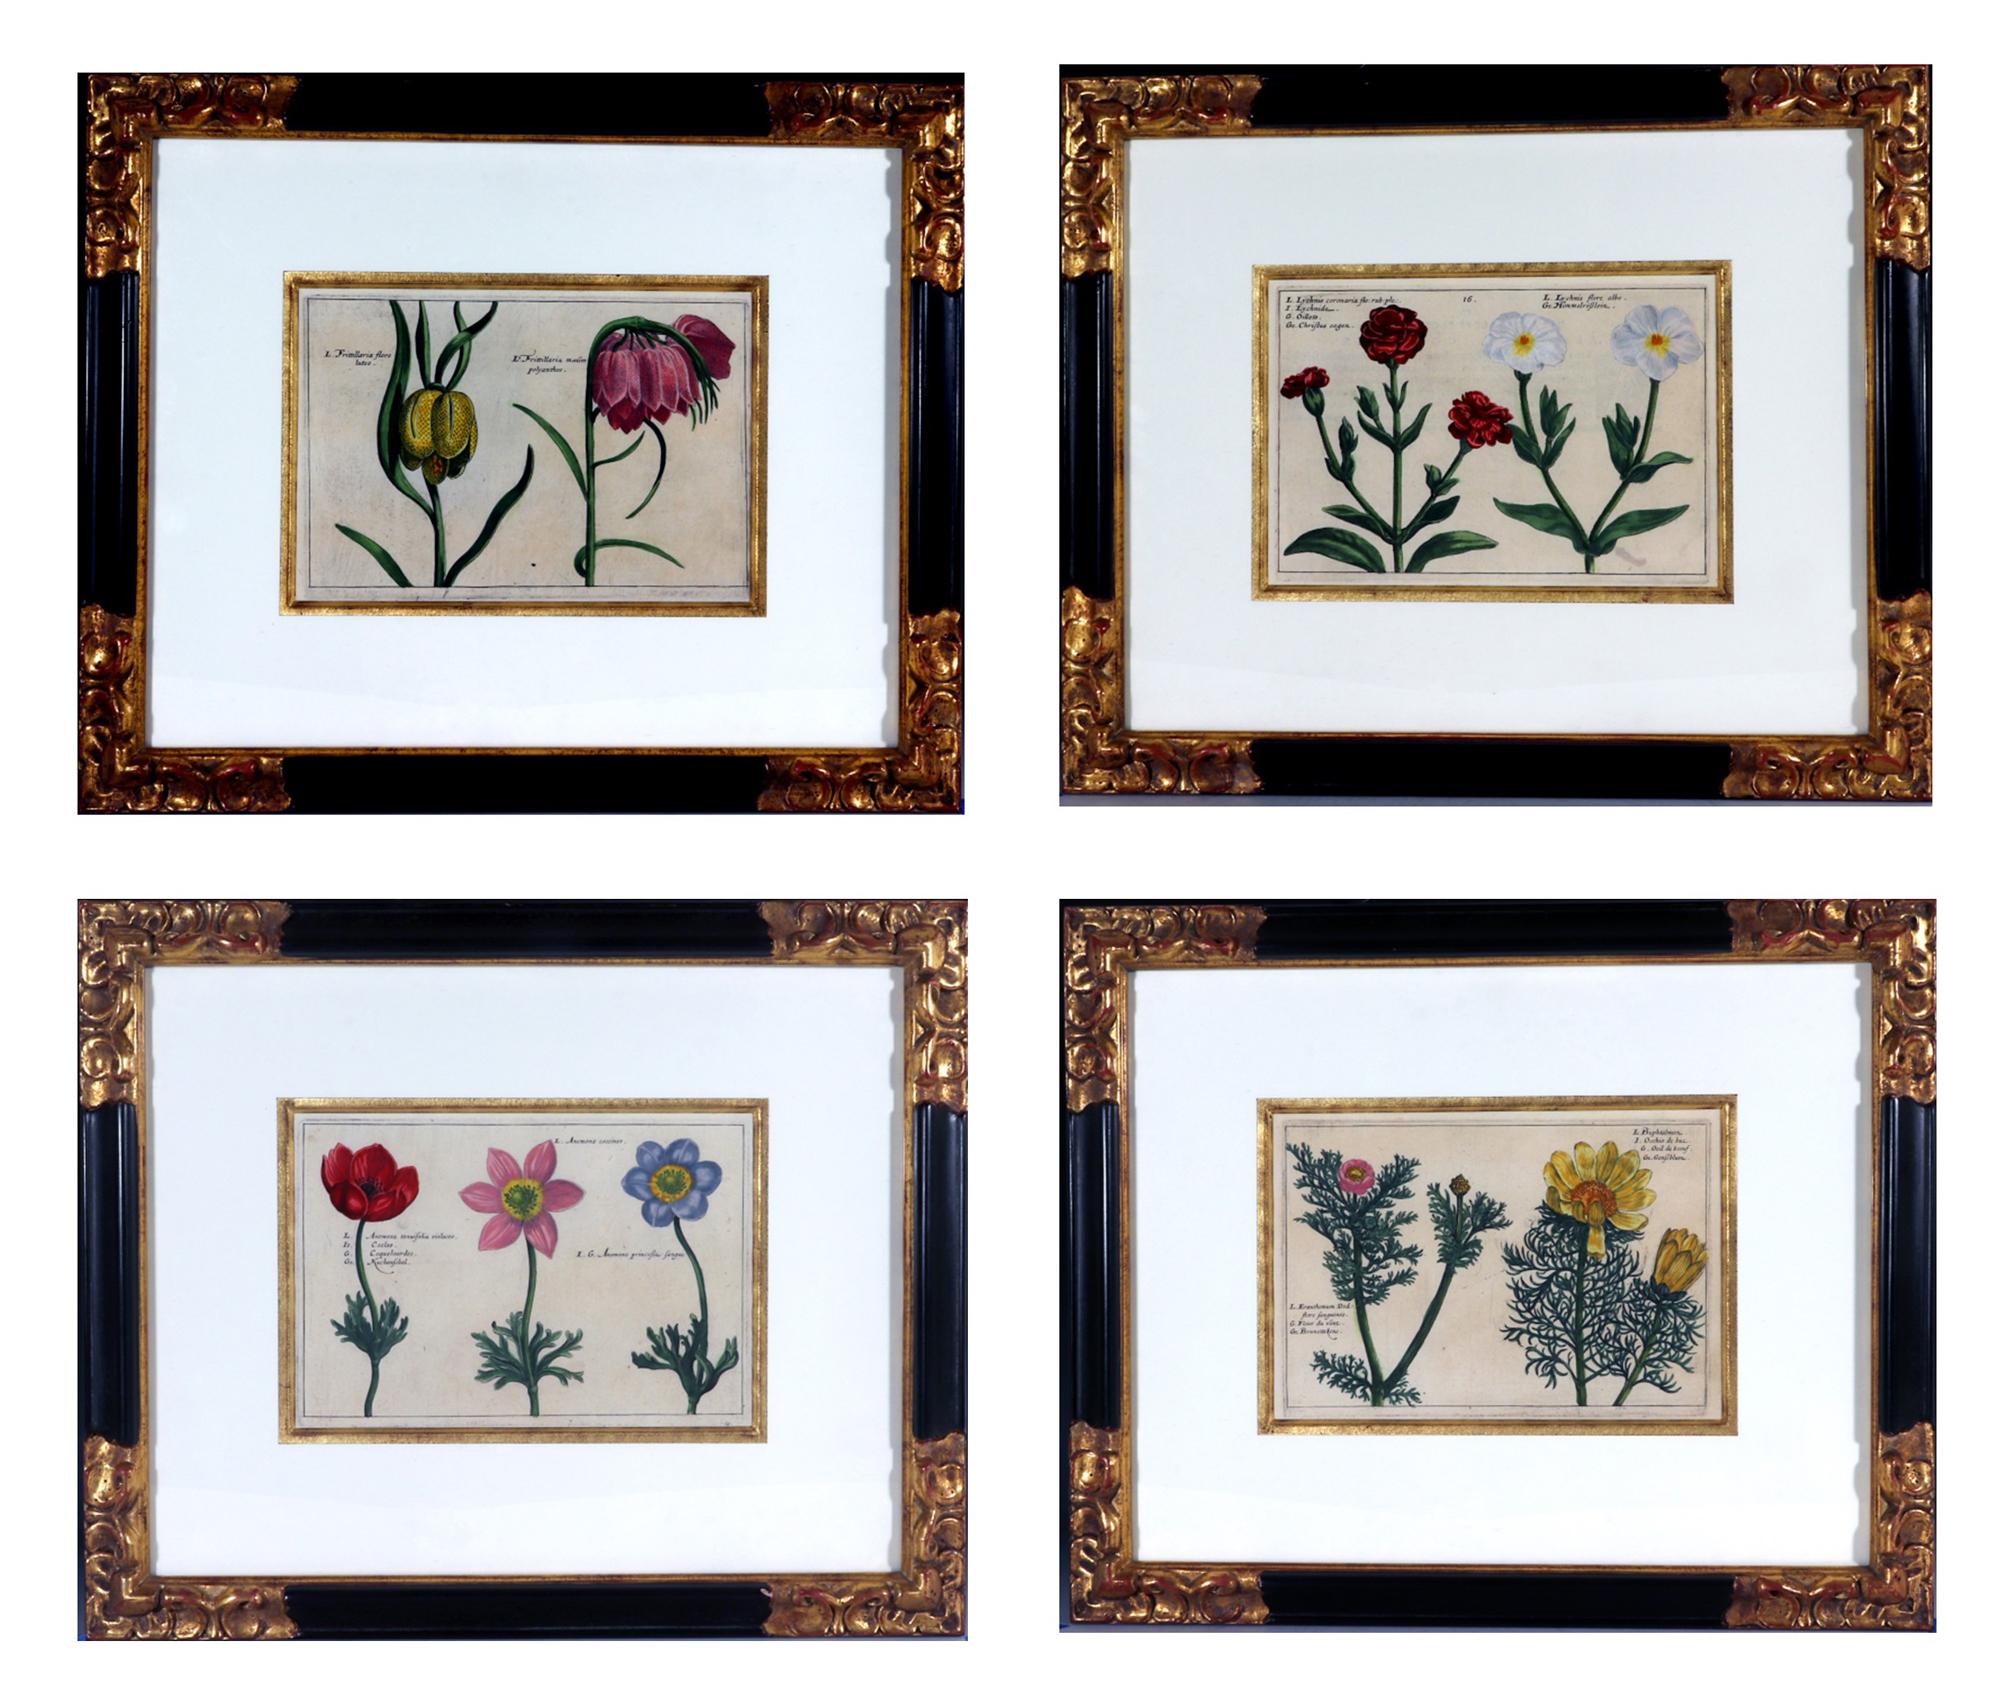 This set of four framed botanical prints is from Crispin van de Passe’s Hortus Floridus, published in 1614-1616. The Hortus Floridus was a collection of 160 engravings depicting flowering plants, and it was one of the most popular botanical books of